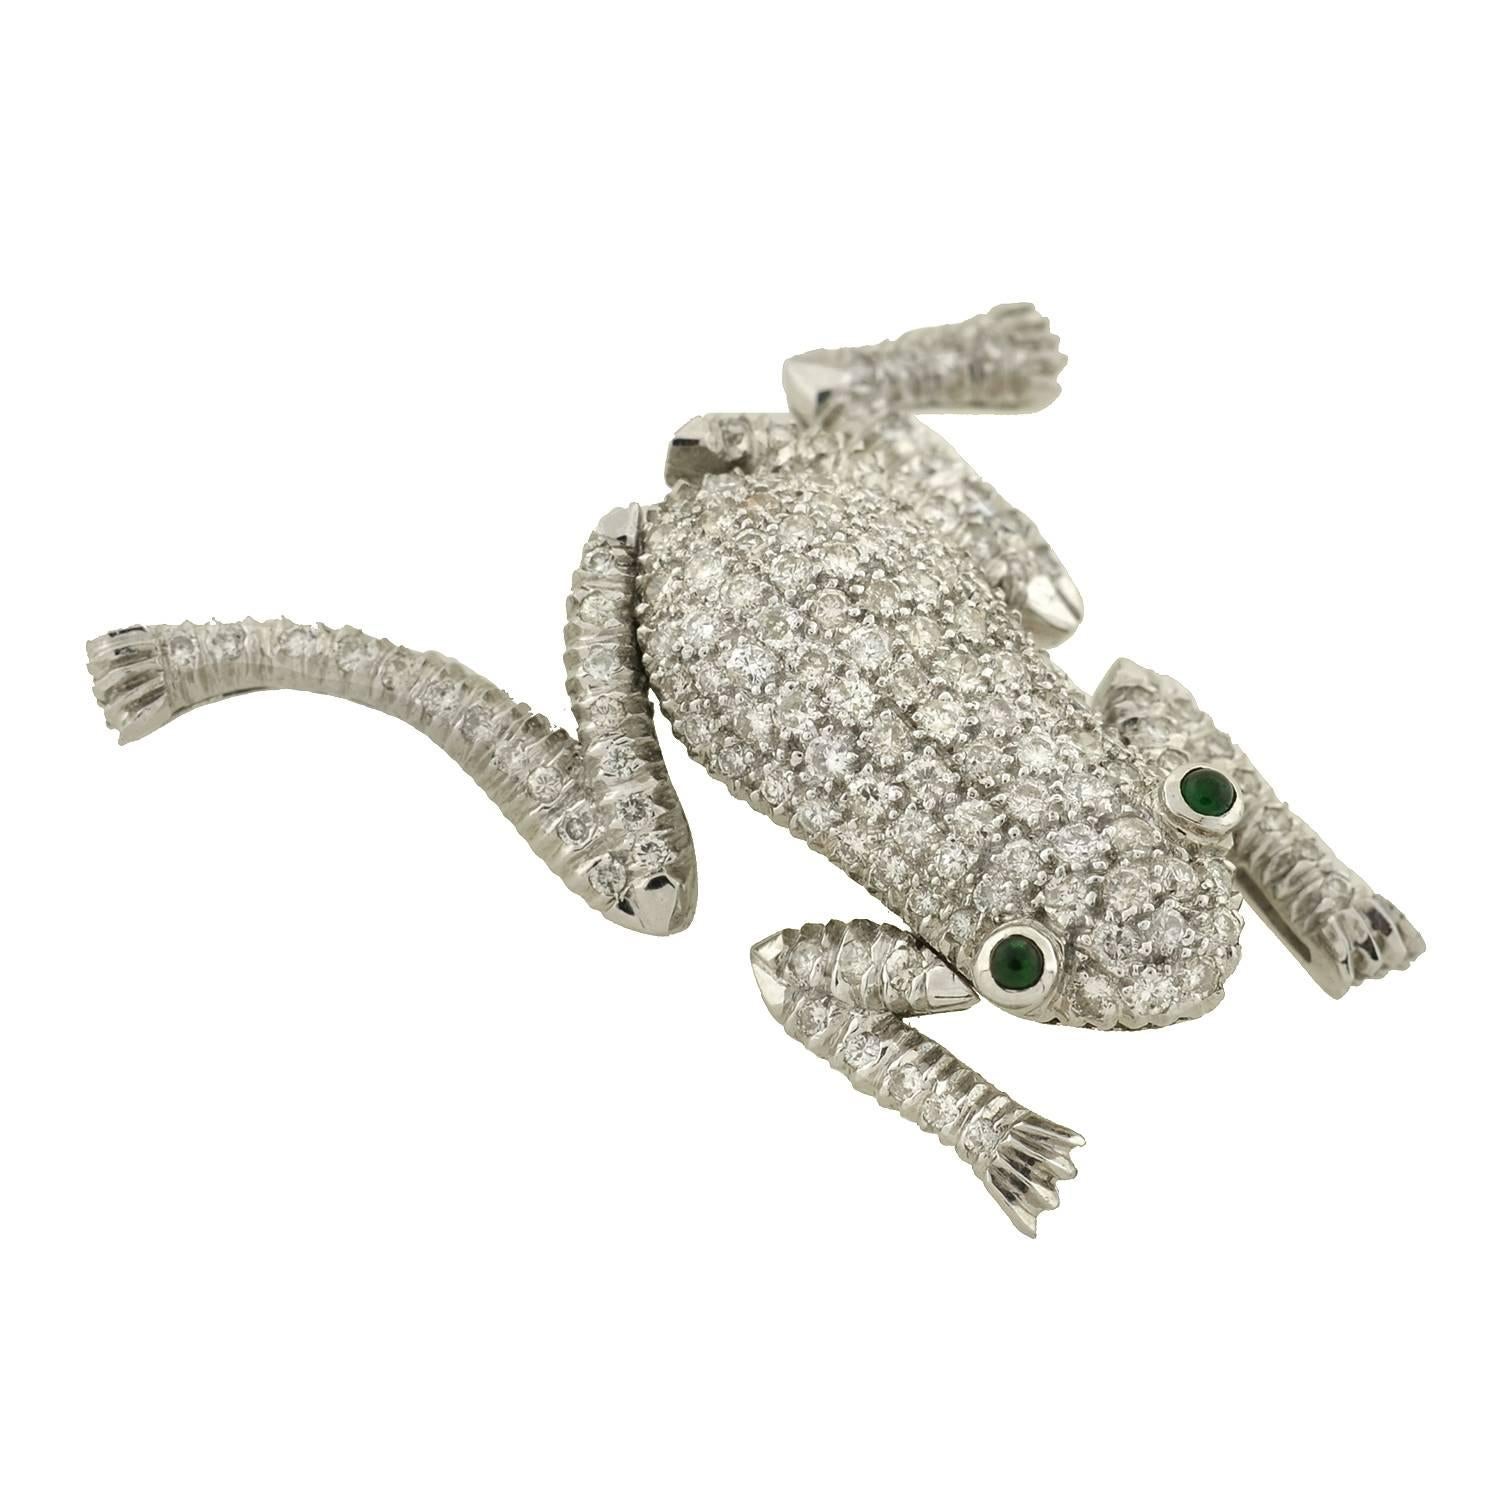 An absolutely charming frog pin from the 1960’s! This wonderful diamond encrusted piece depicts a handsome frog and has a 3-dimensional look. The diamonds are pave set within 18kt white gold and have a total overall weight of approximately 2.00ct